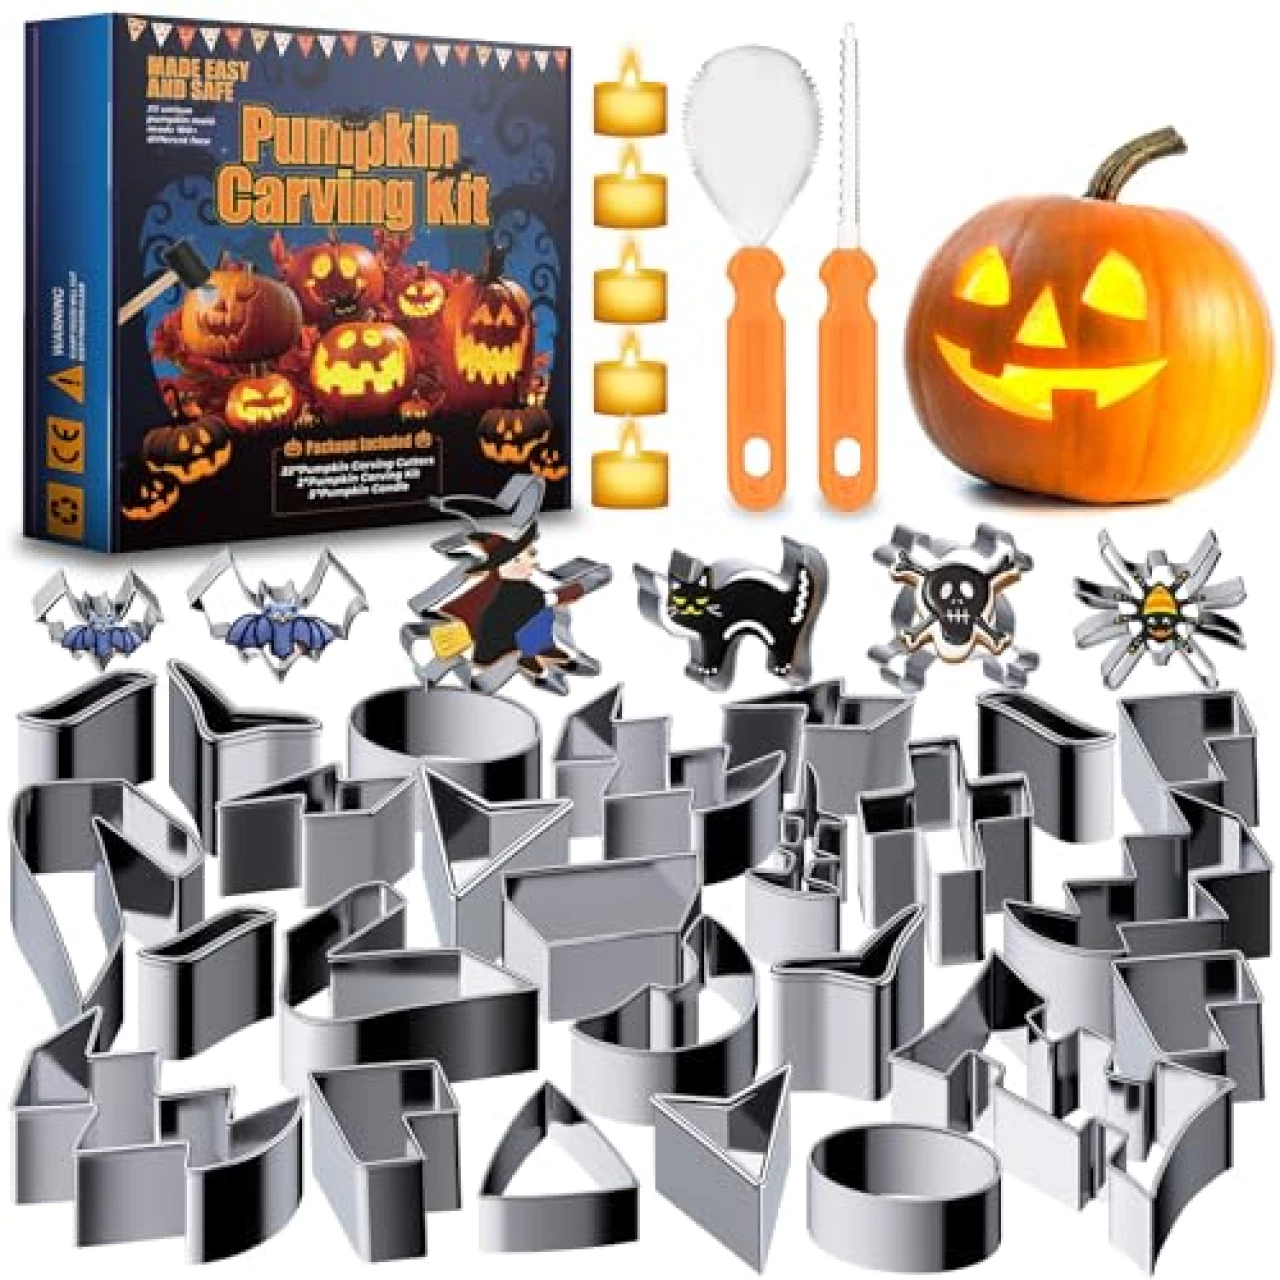 kopotma 29PCS Pumpkin Carving Tools, Easy and Safe Pumpkin Carving Kit, Pumpkin Carving Stencils Metal Pumpkin Carving Cookie Cutters, Pumpkin Carving Kit for Kids &amp; Adults